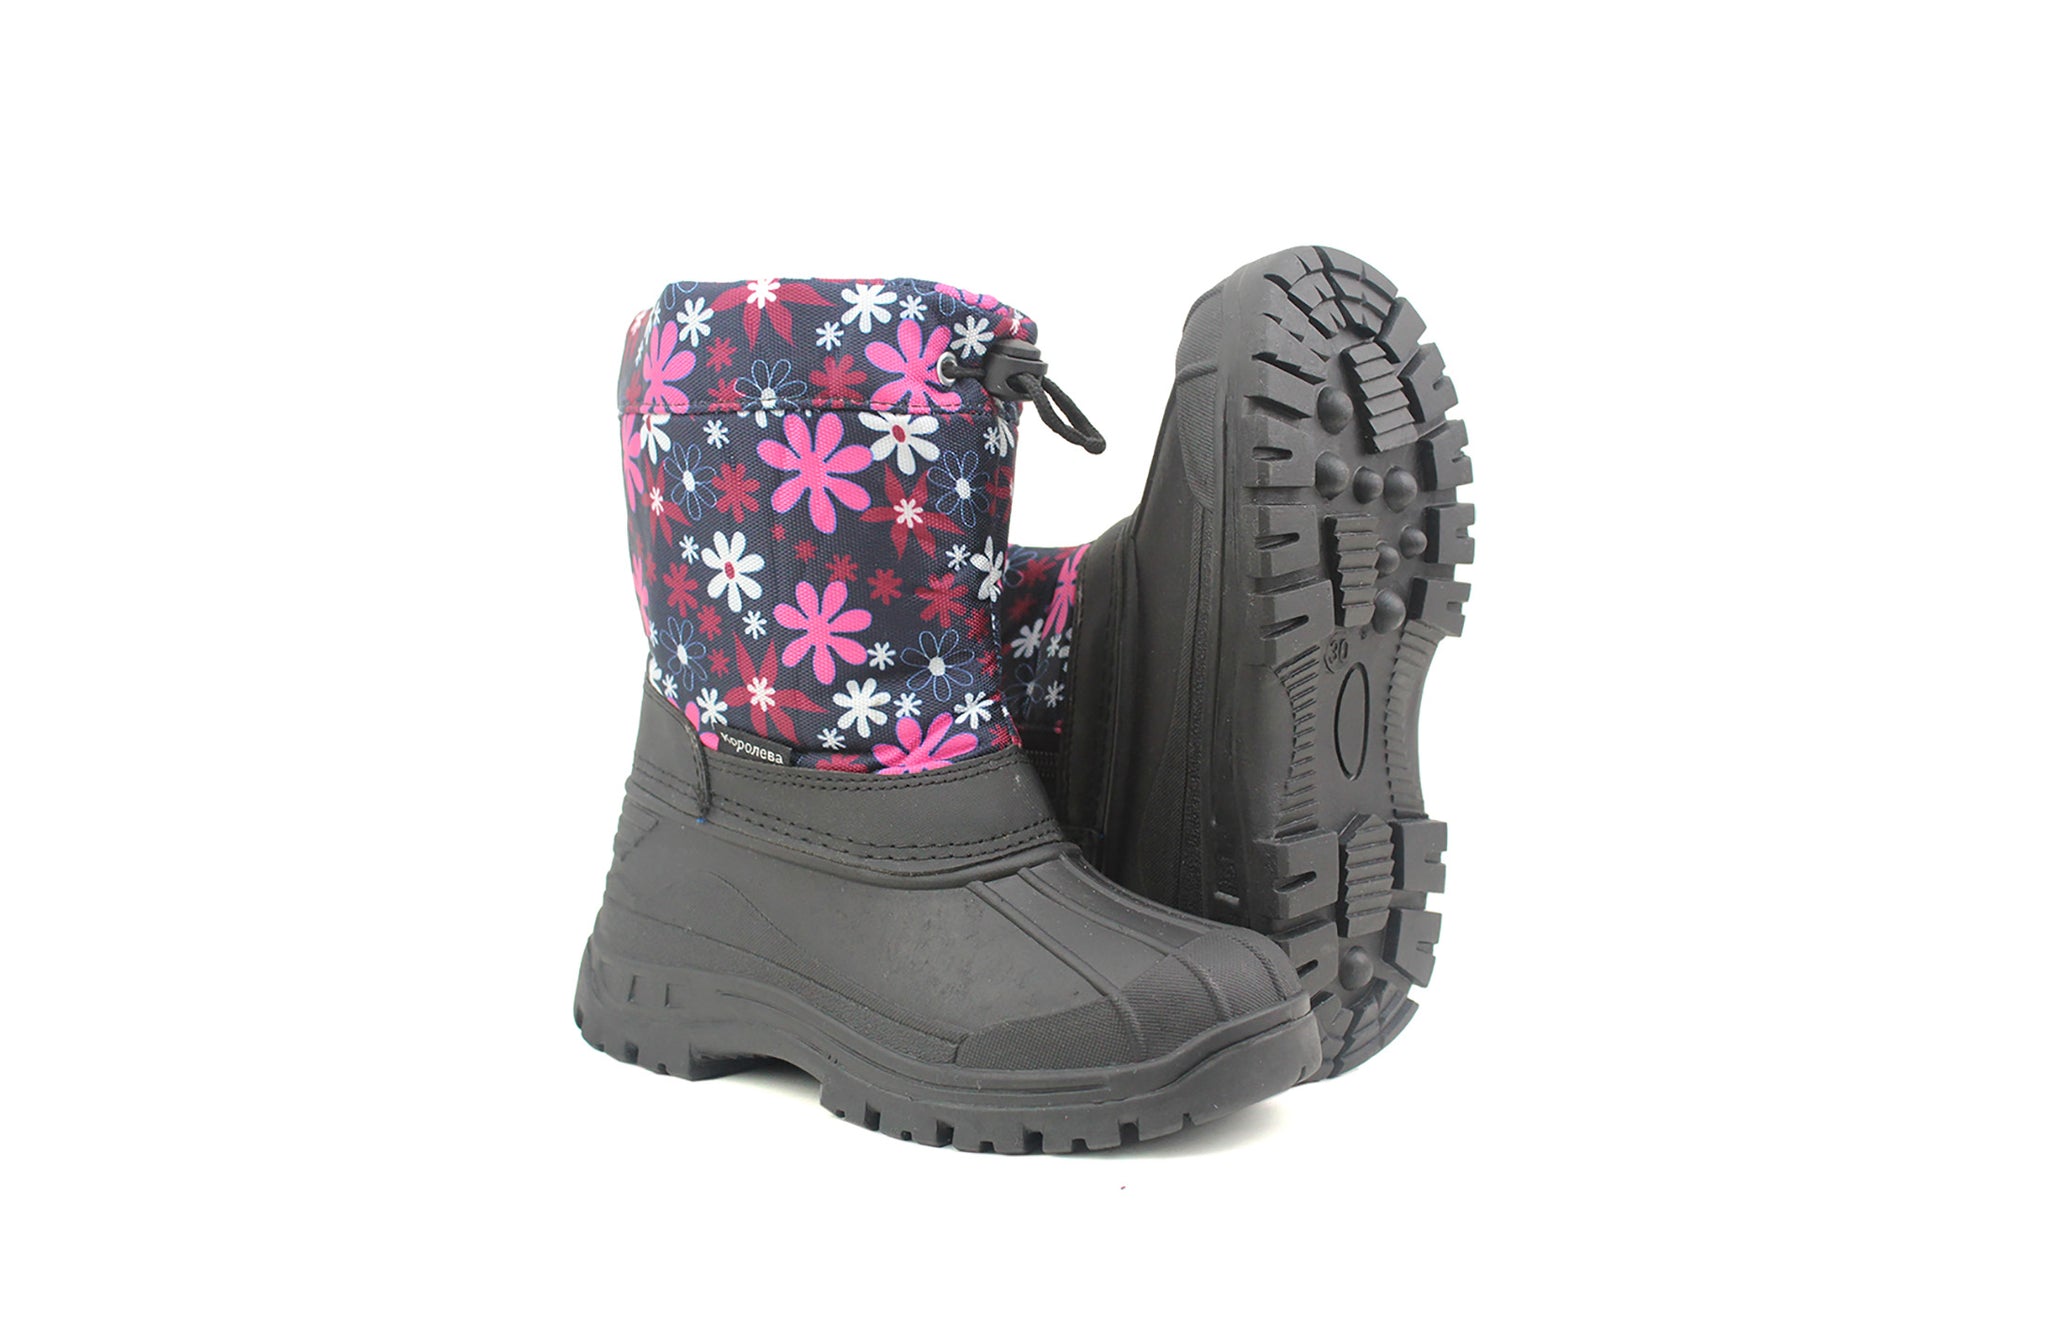 Girls Kids Youth Navy Floral Pattern Thermal Fleece Lined Water Resistant Snow Boots